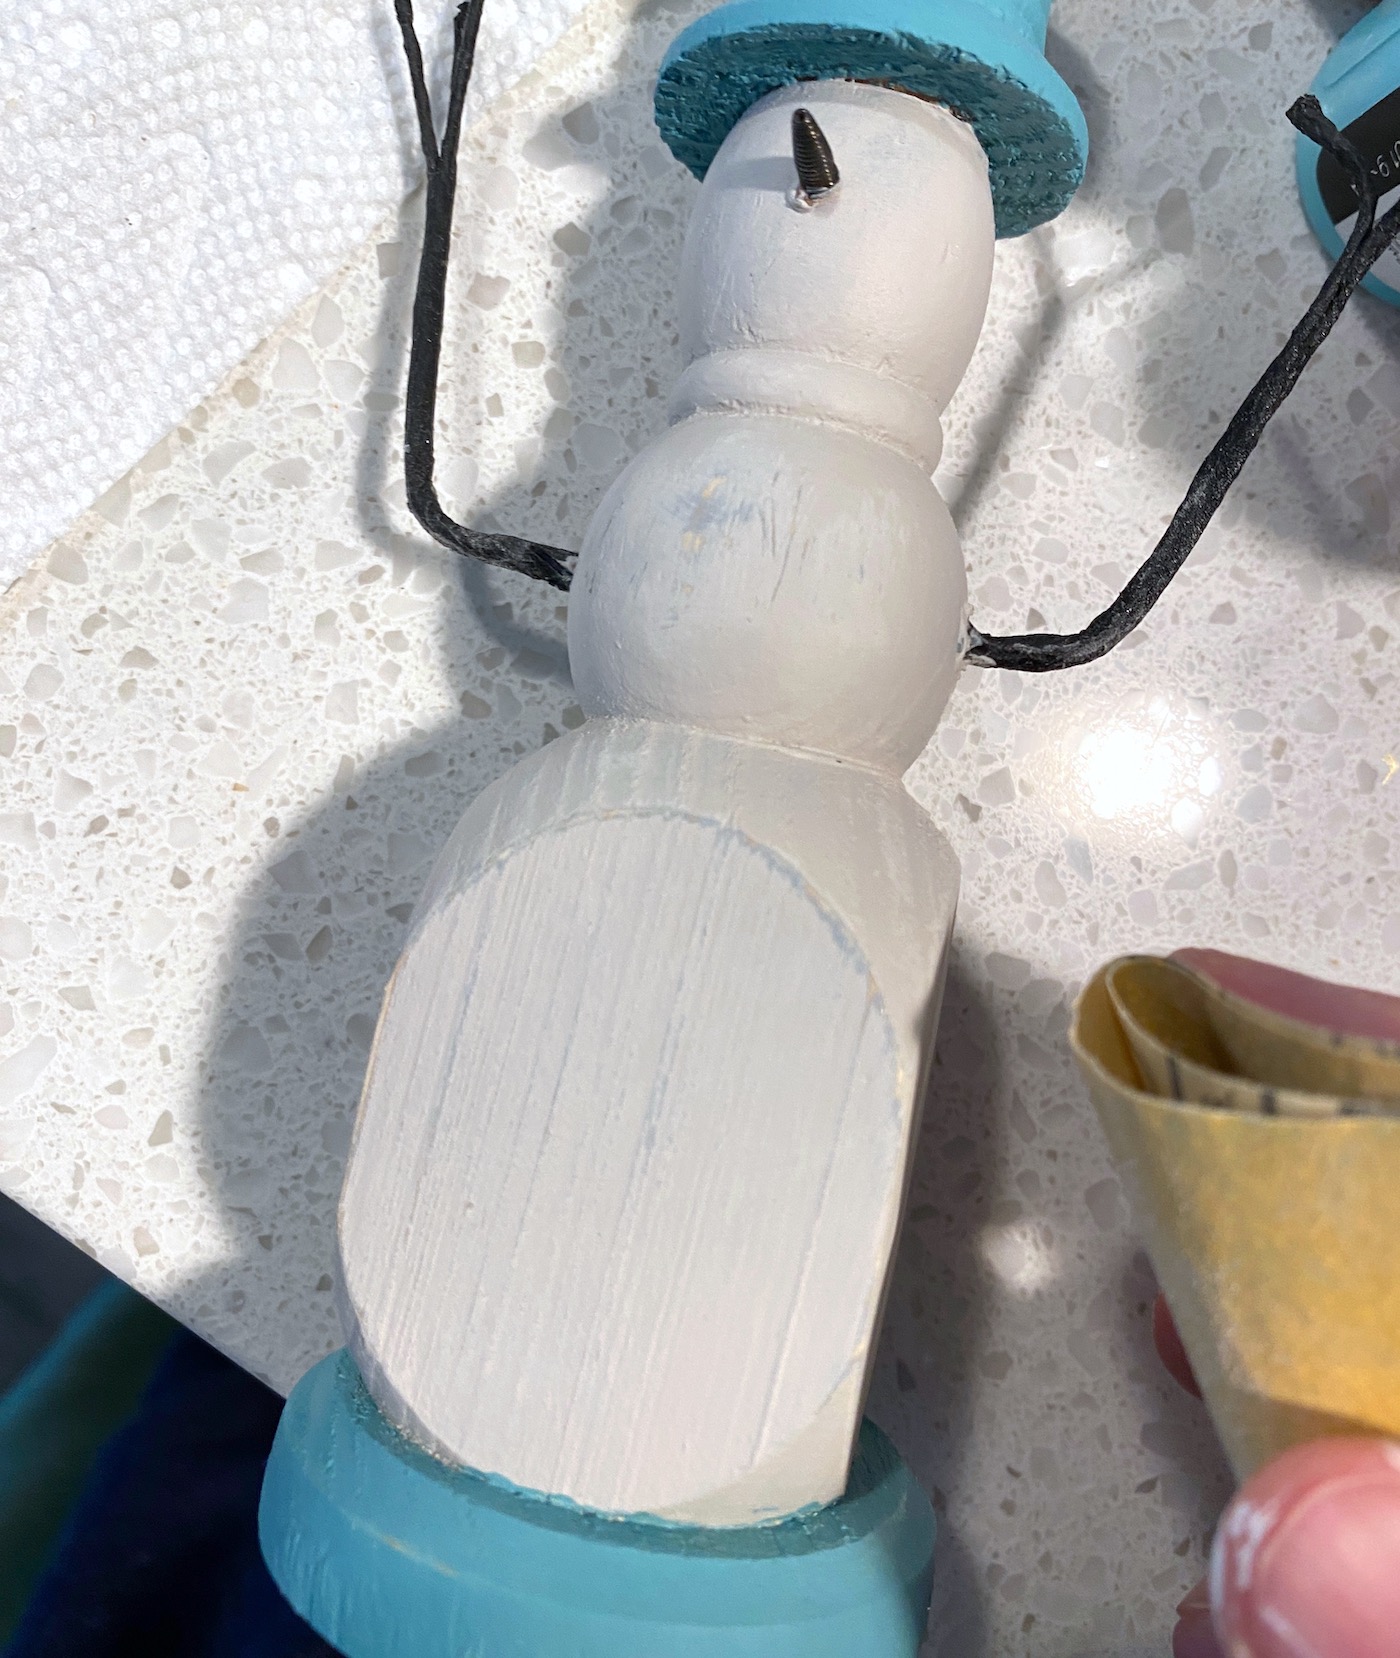 Sanding the candle holder to distress